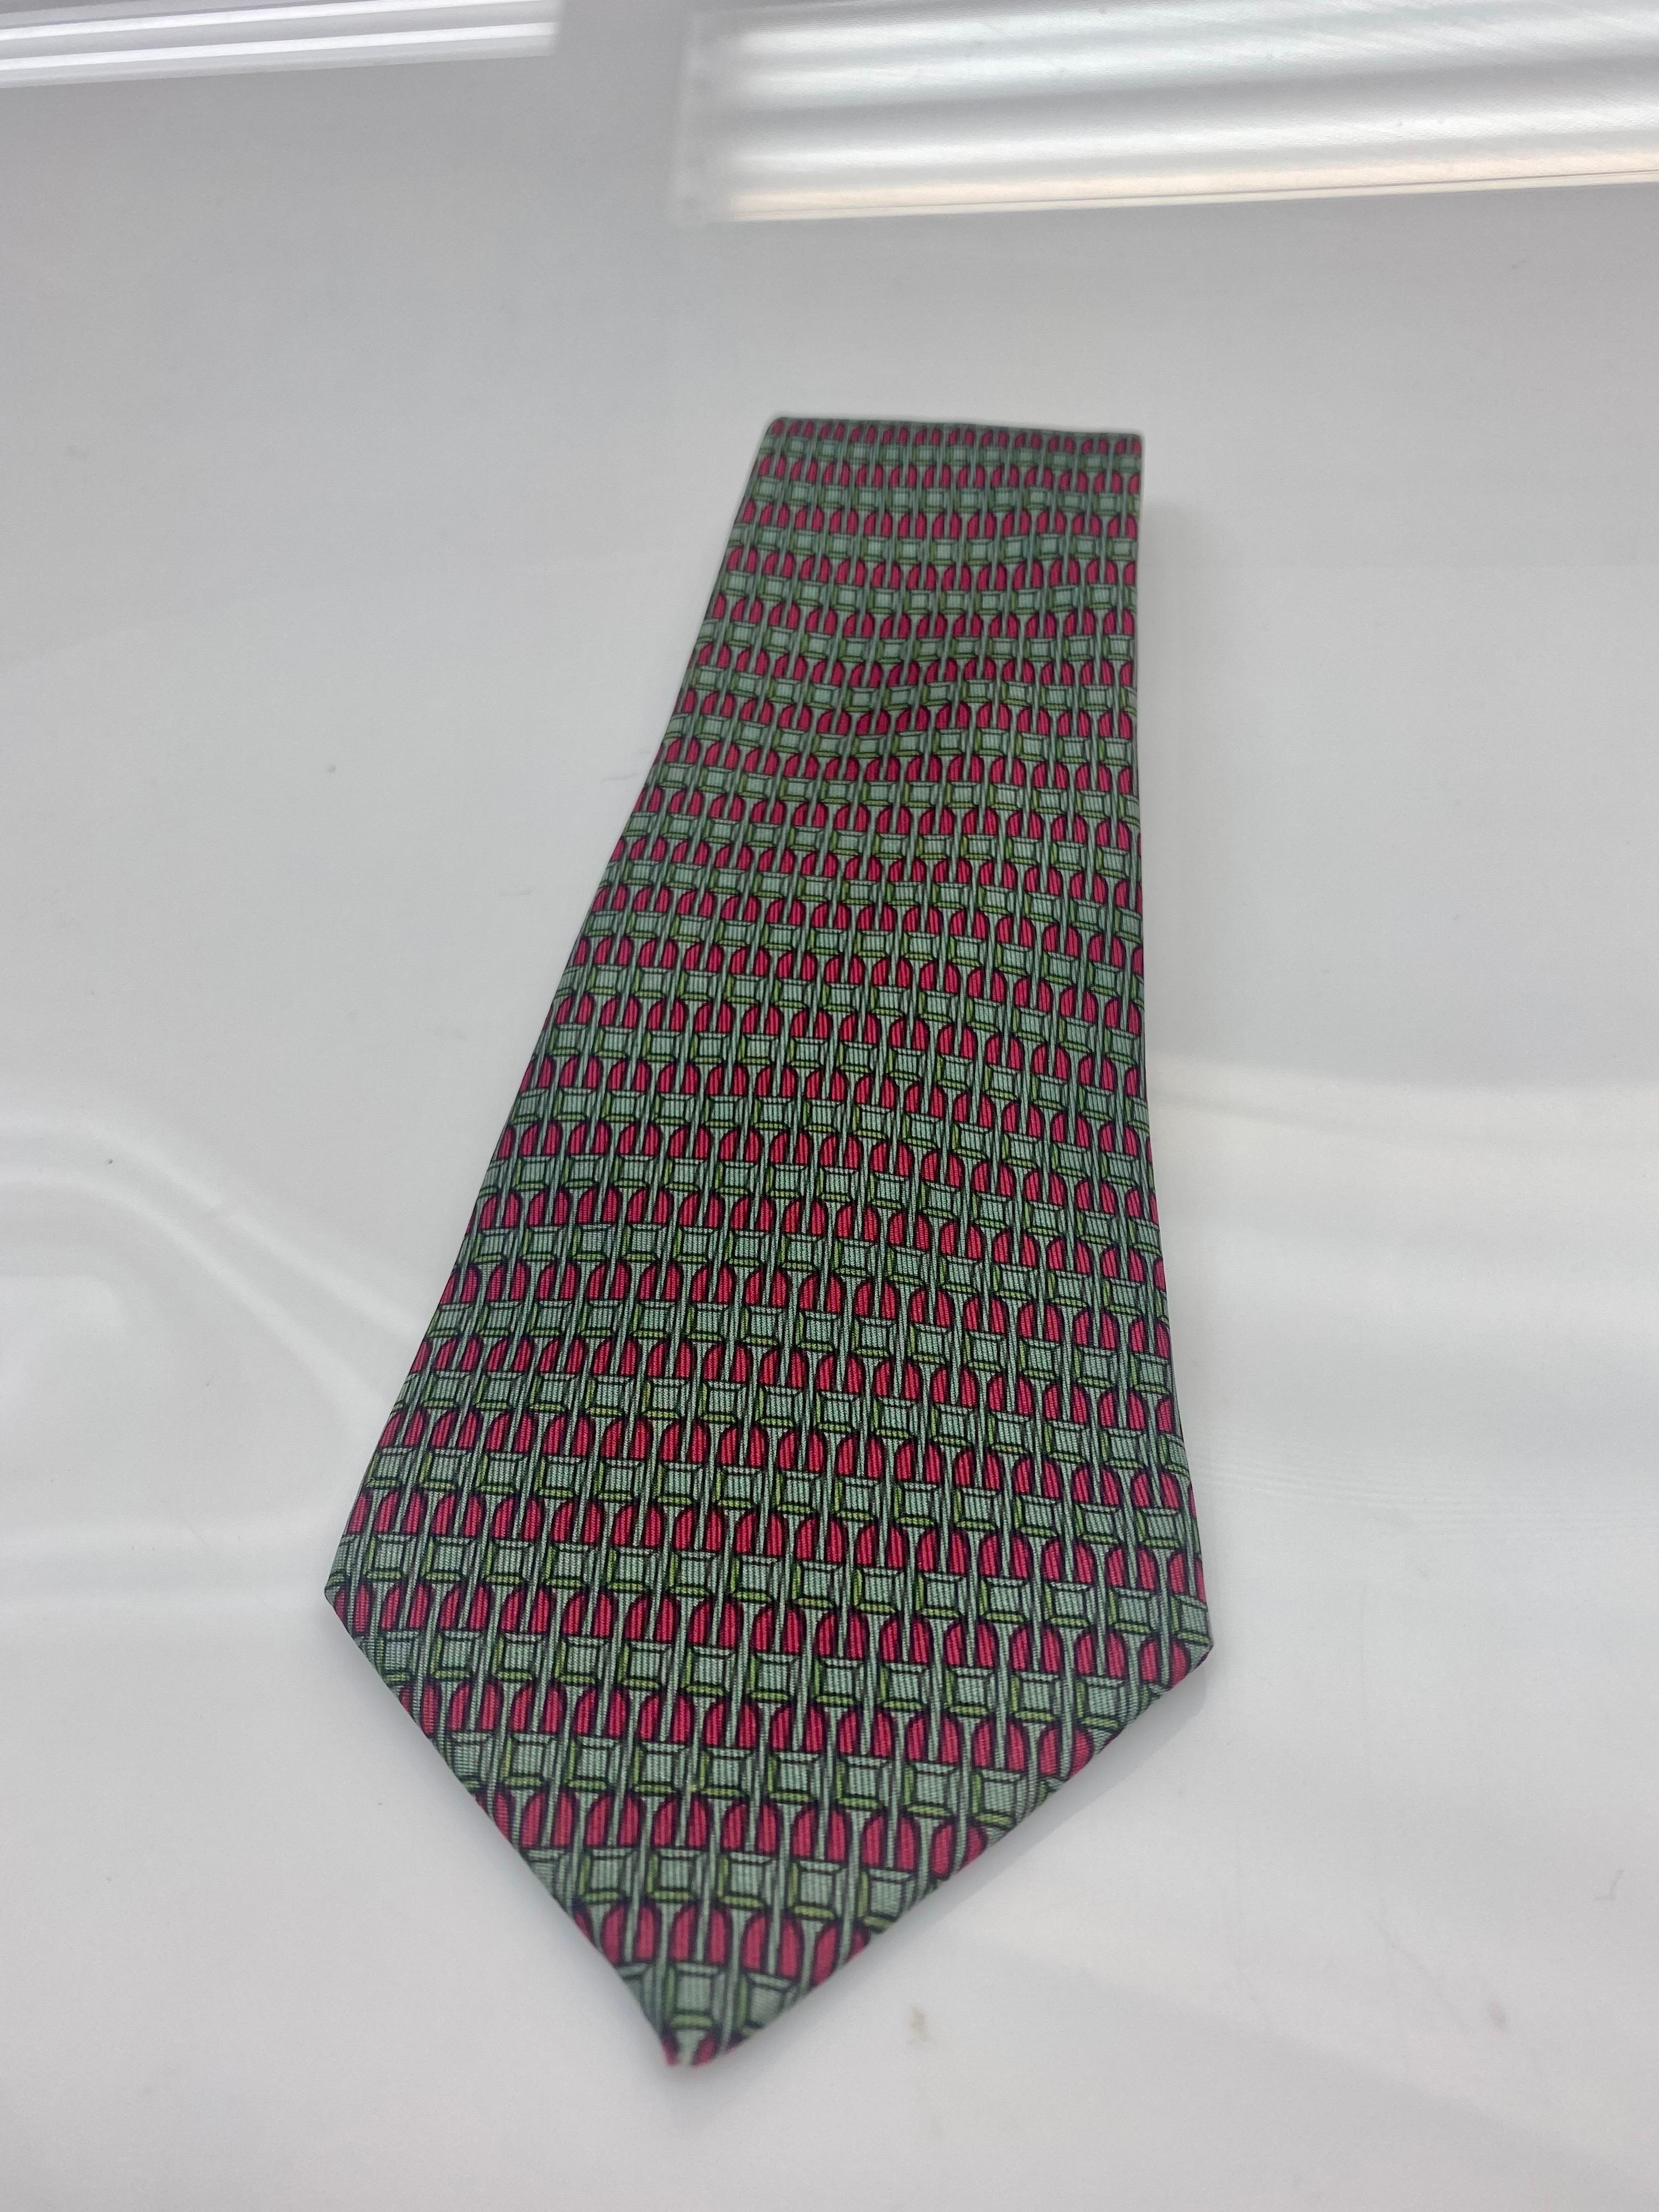 Hermes silk red and green square print tie.
Sophisticated and classic piece and a perfect addition to any wardrobe. Item is in good condition, wear consistent with age. 

Width: 3.5